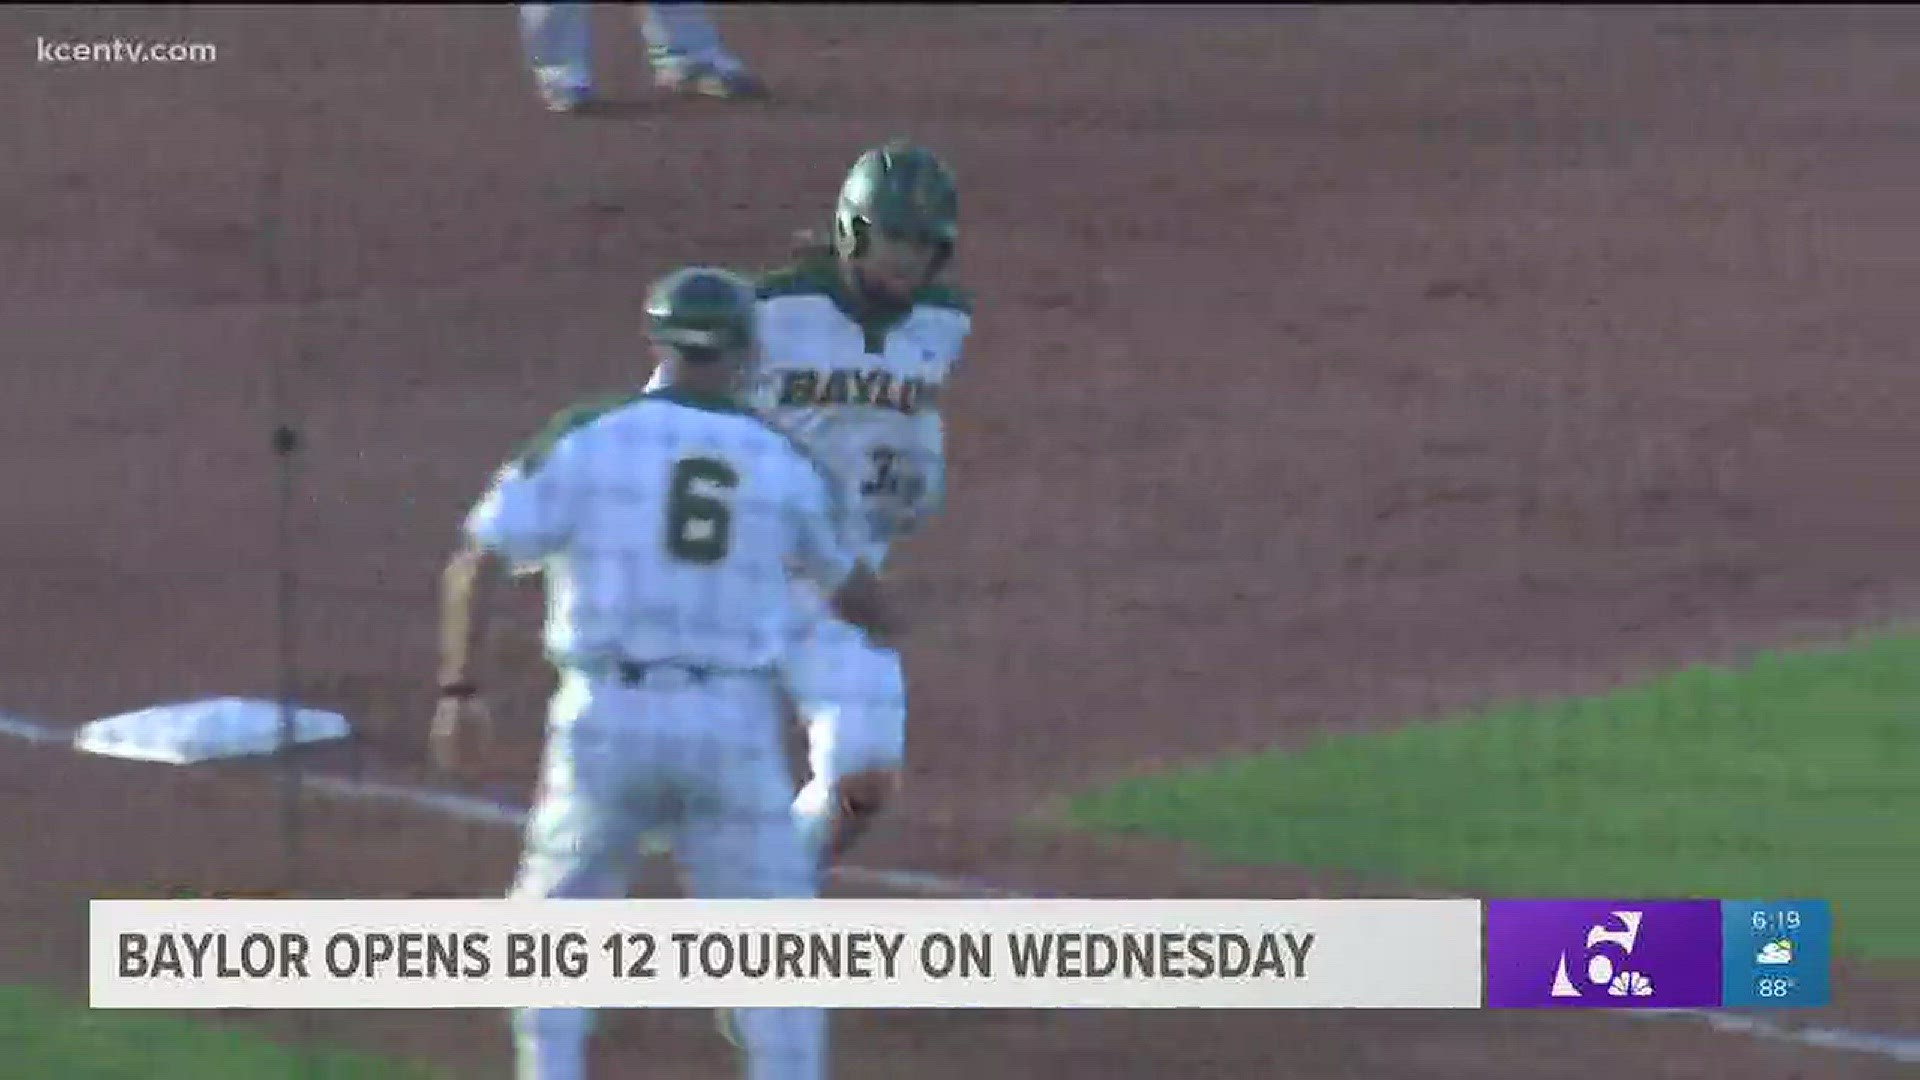 Baylor opens Big 12 tournament play tomorrow morning when they square off against 4th seed Oklahoma.